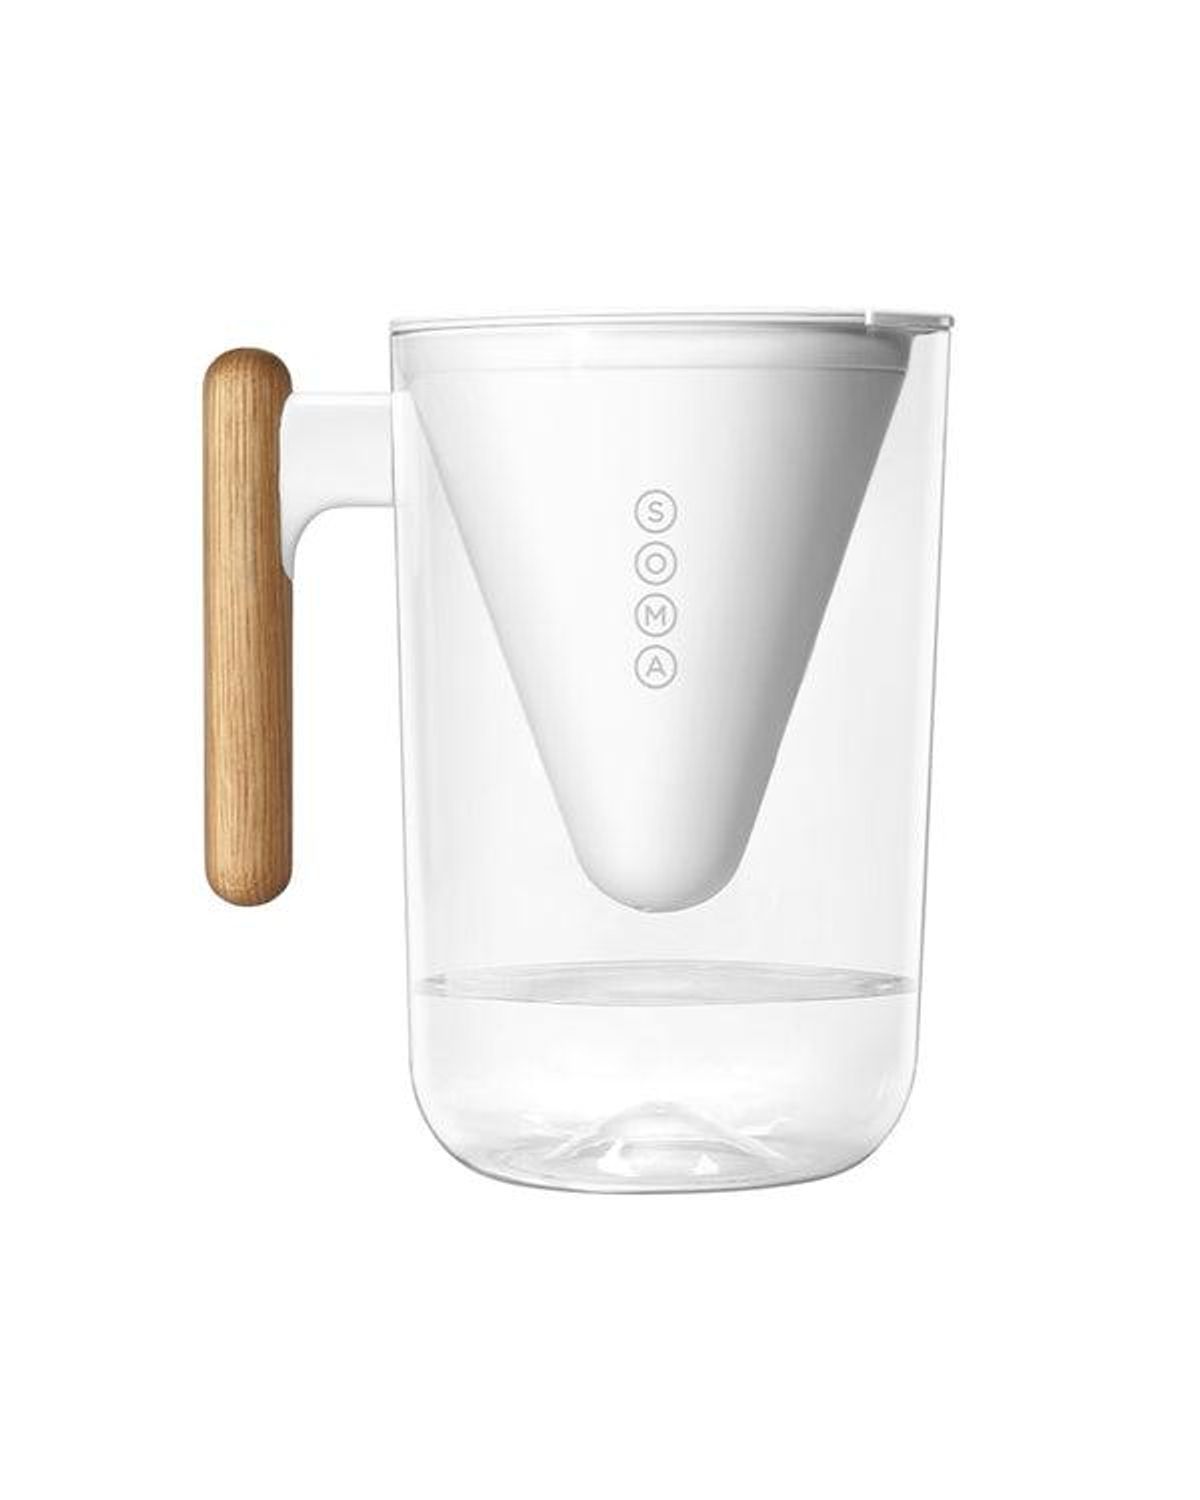 10 Cup Water Pitcher